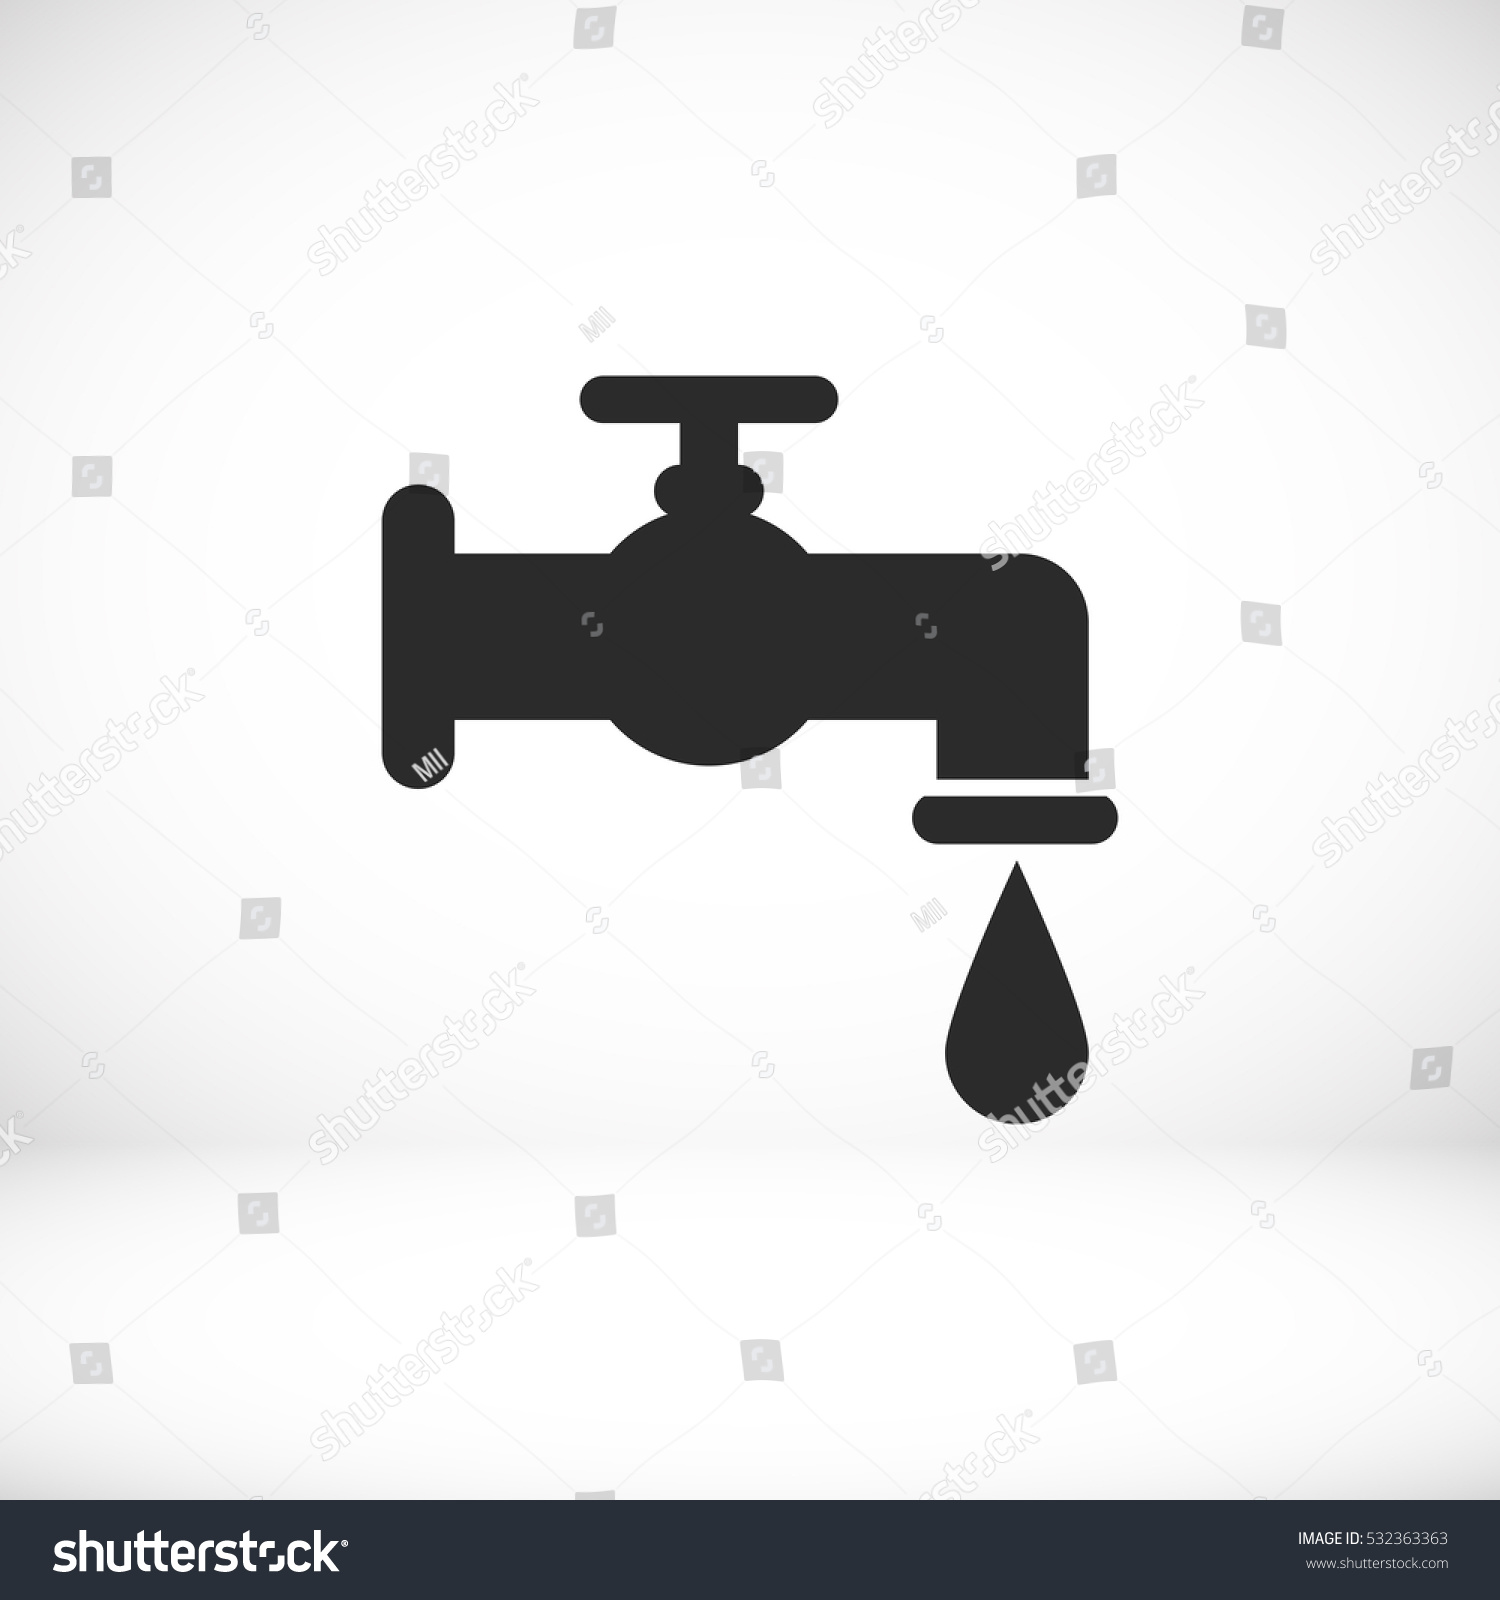 Faucet Vector Icon - 532363363 : Shutterstock